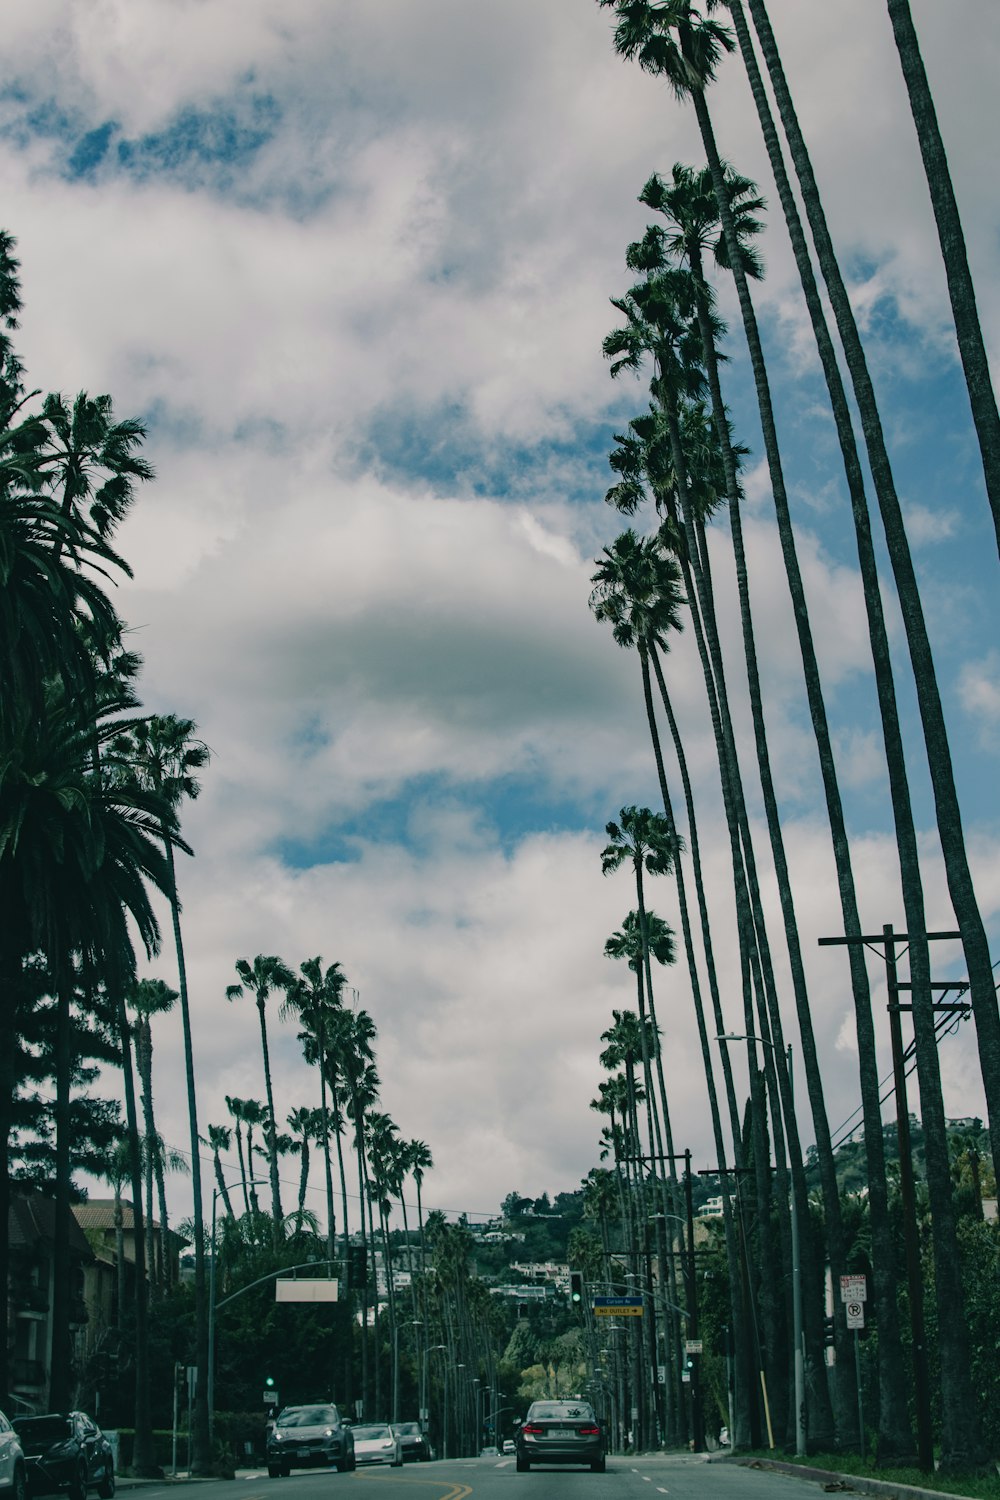 a street lined with tall palm trees under a cloudy blue sky